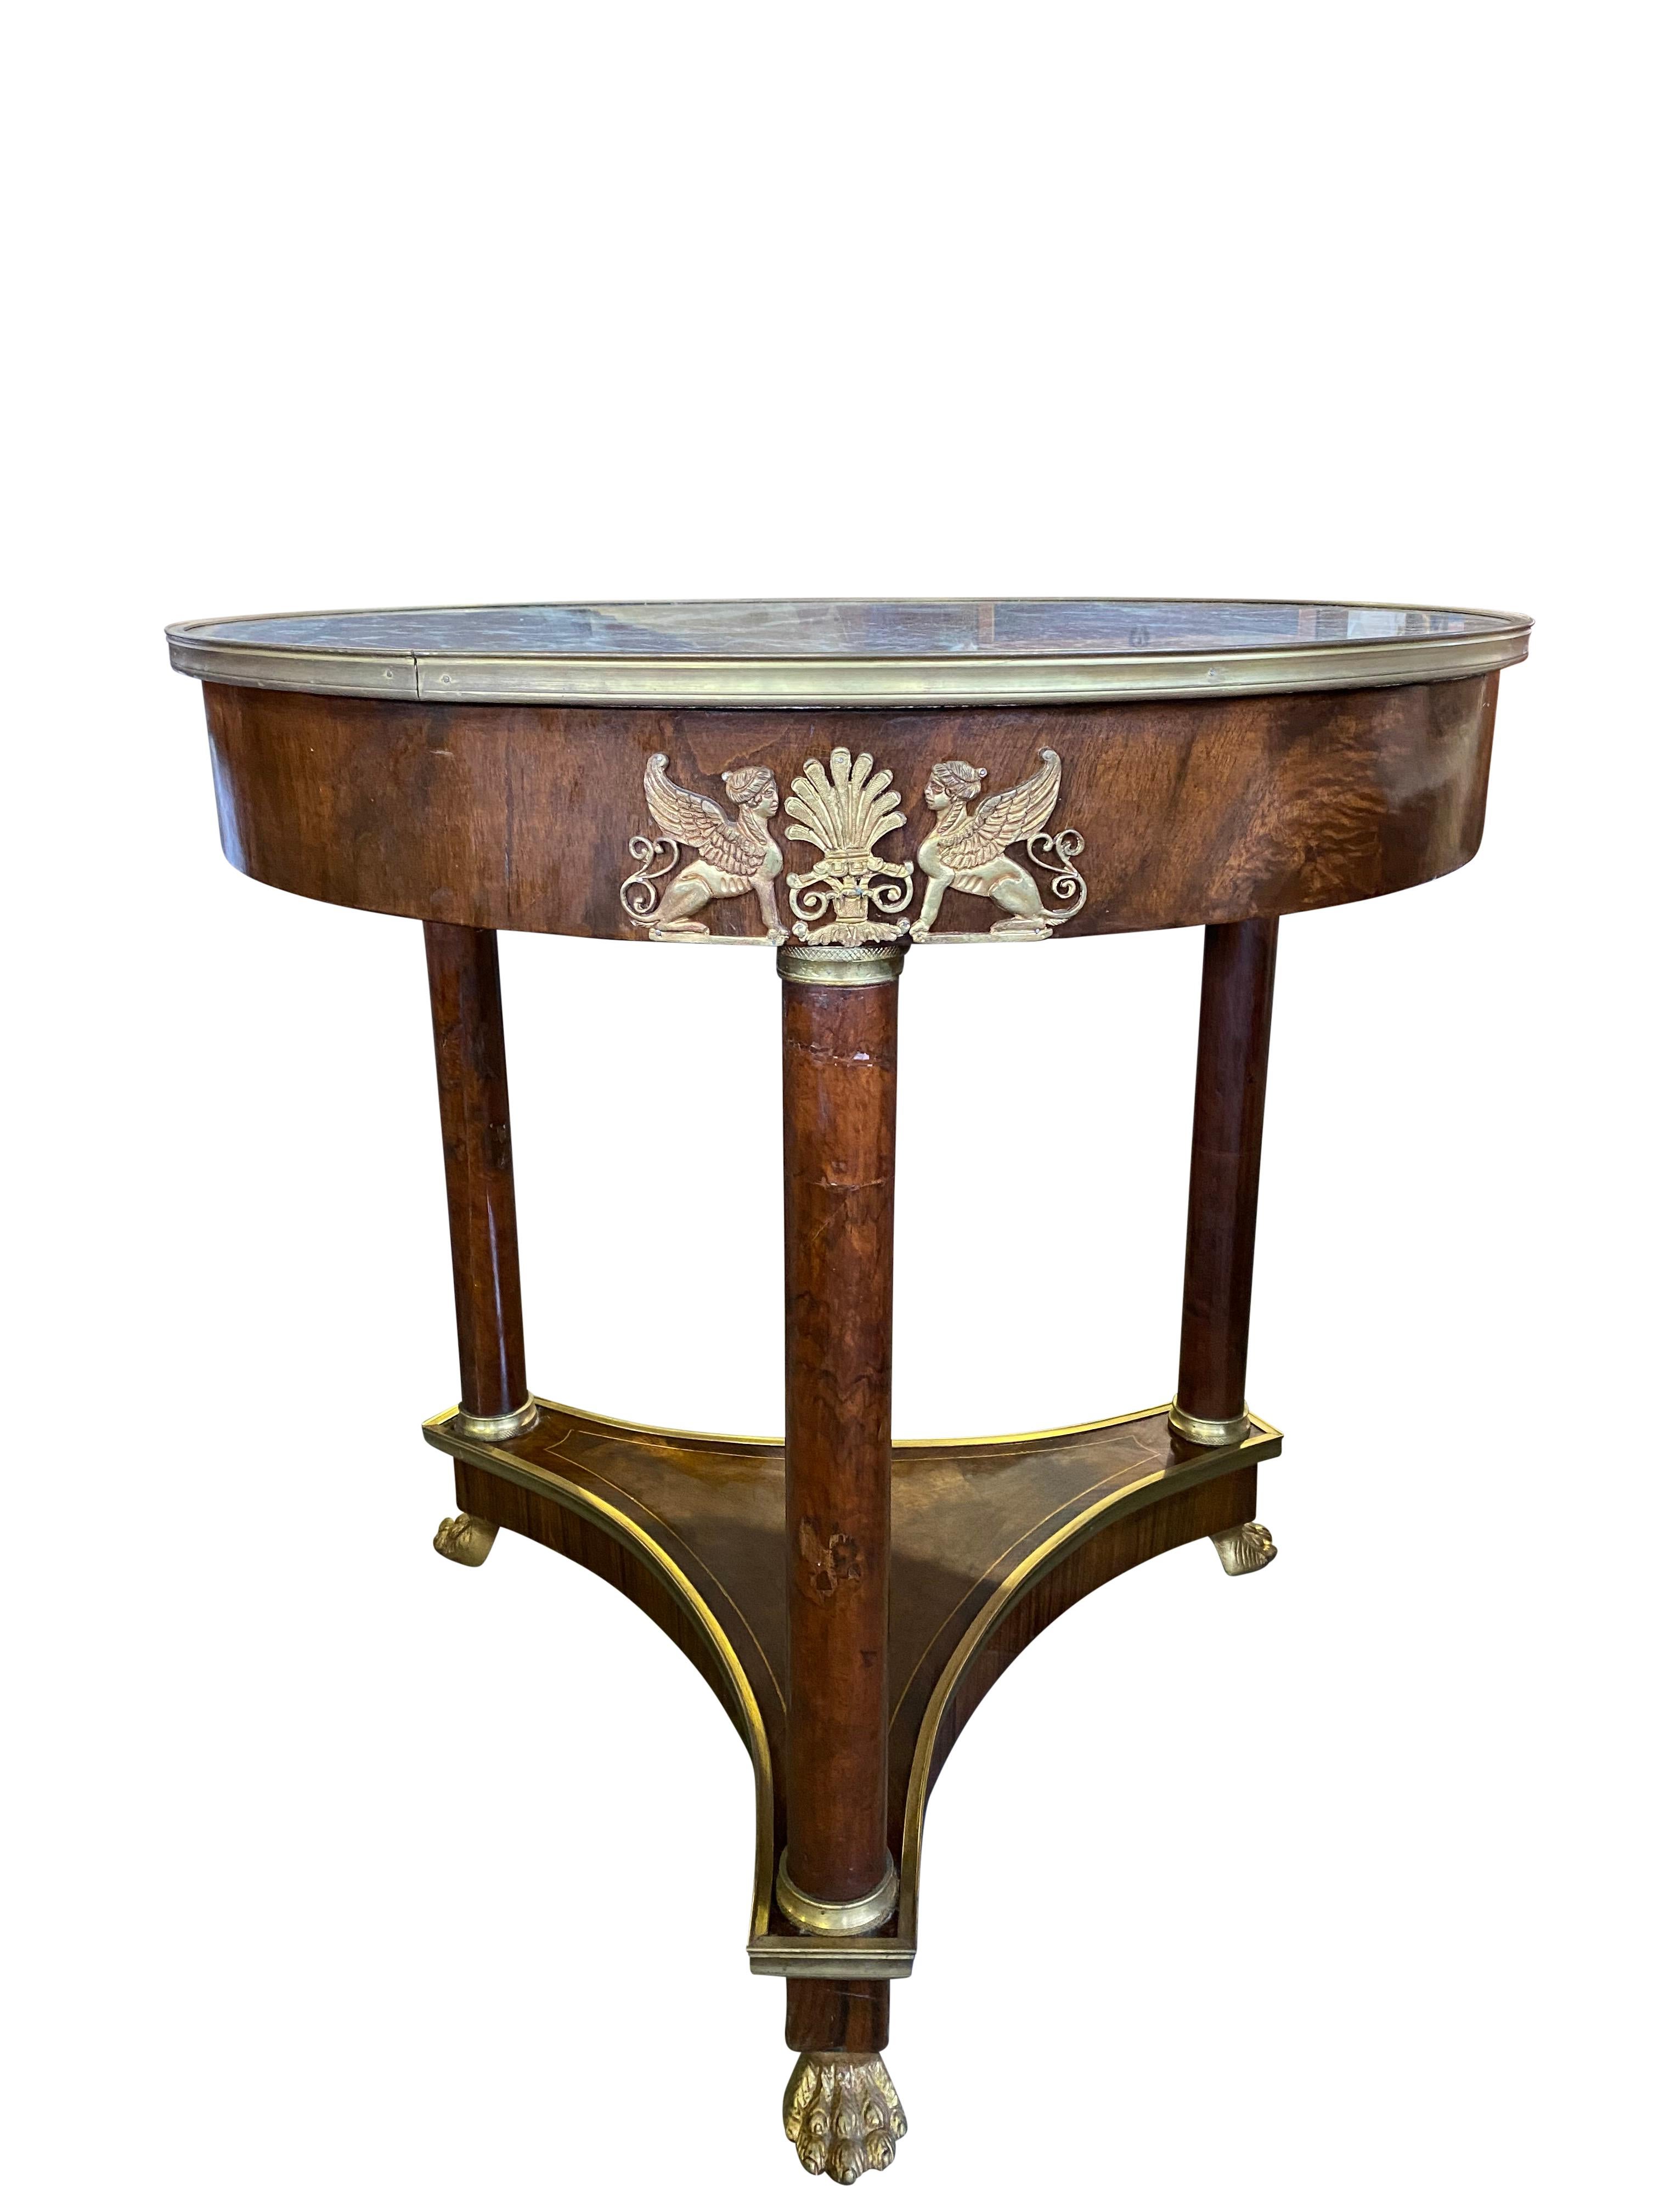 French Empire Round Marble Top Table, 19th Century For Sale 3